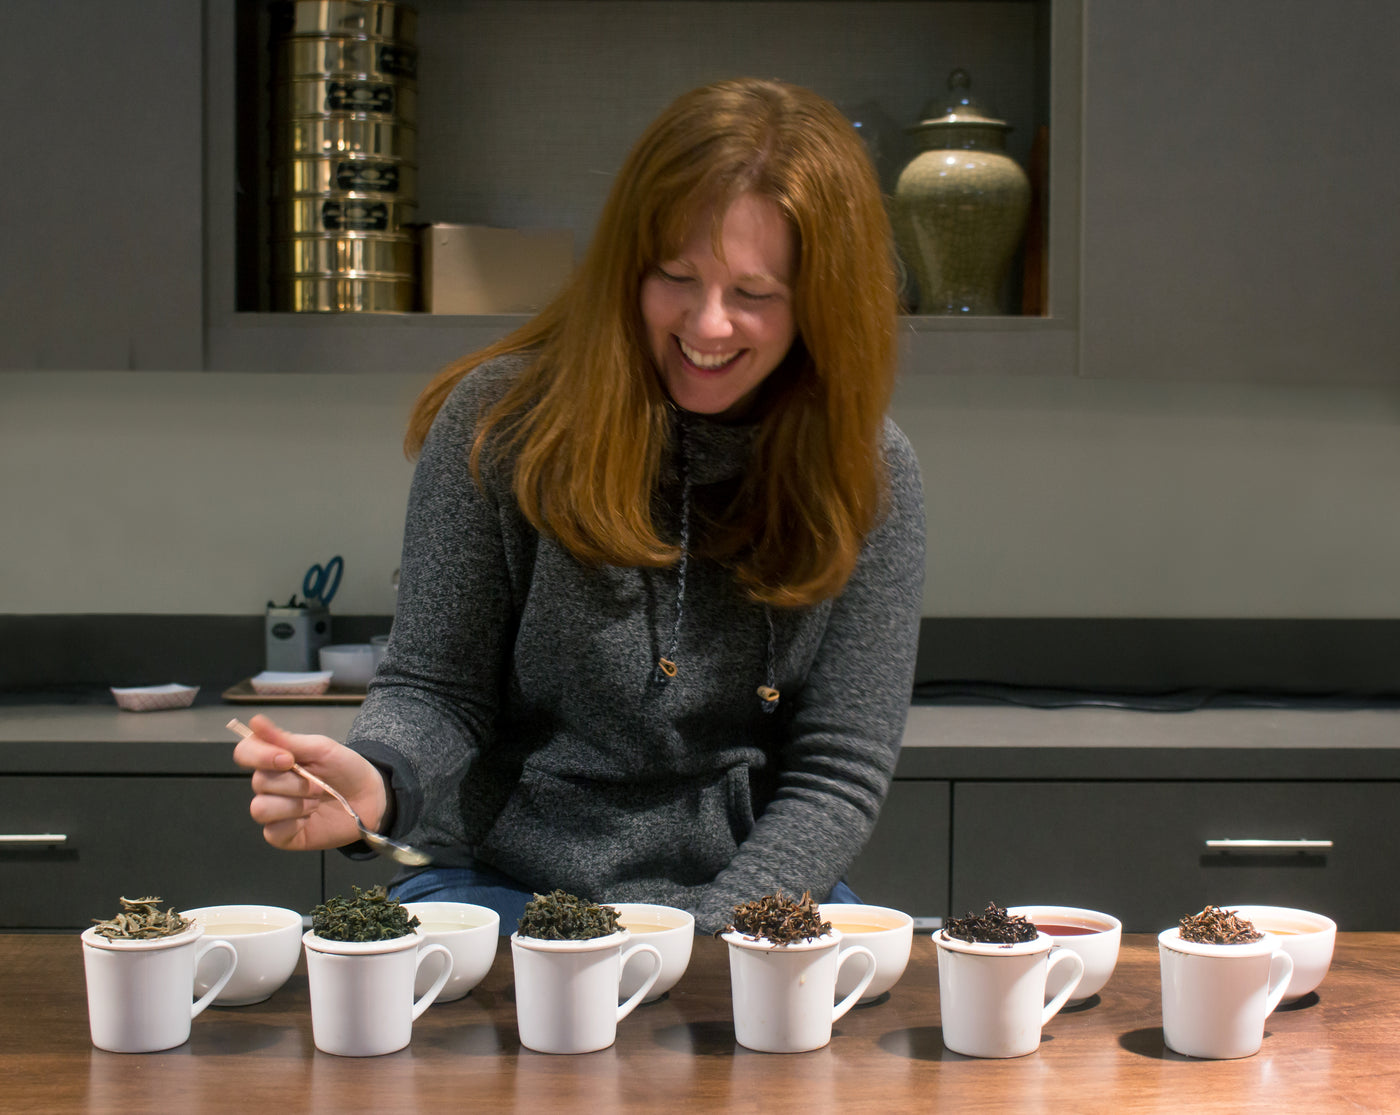 Teamaker, Sara Kaufmann, holding a spoon about to take a sip from a cup during a line tasting.